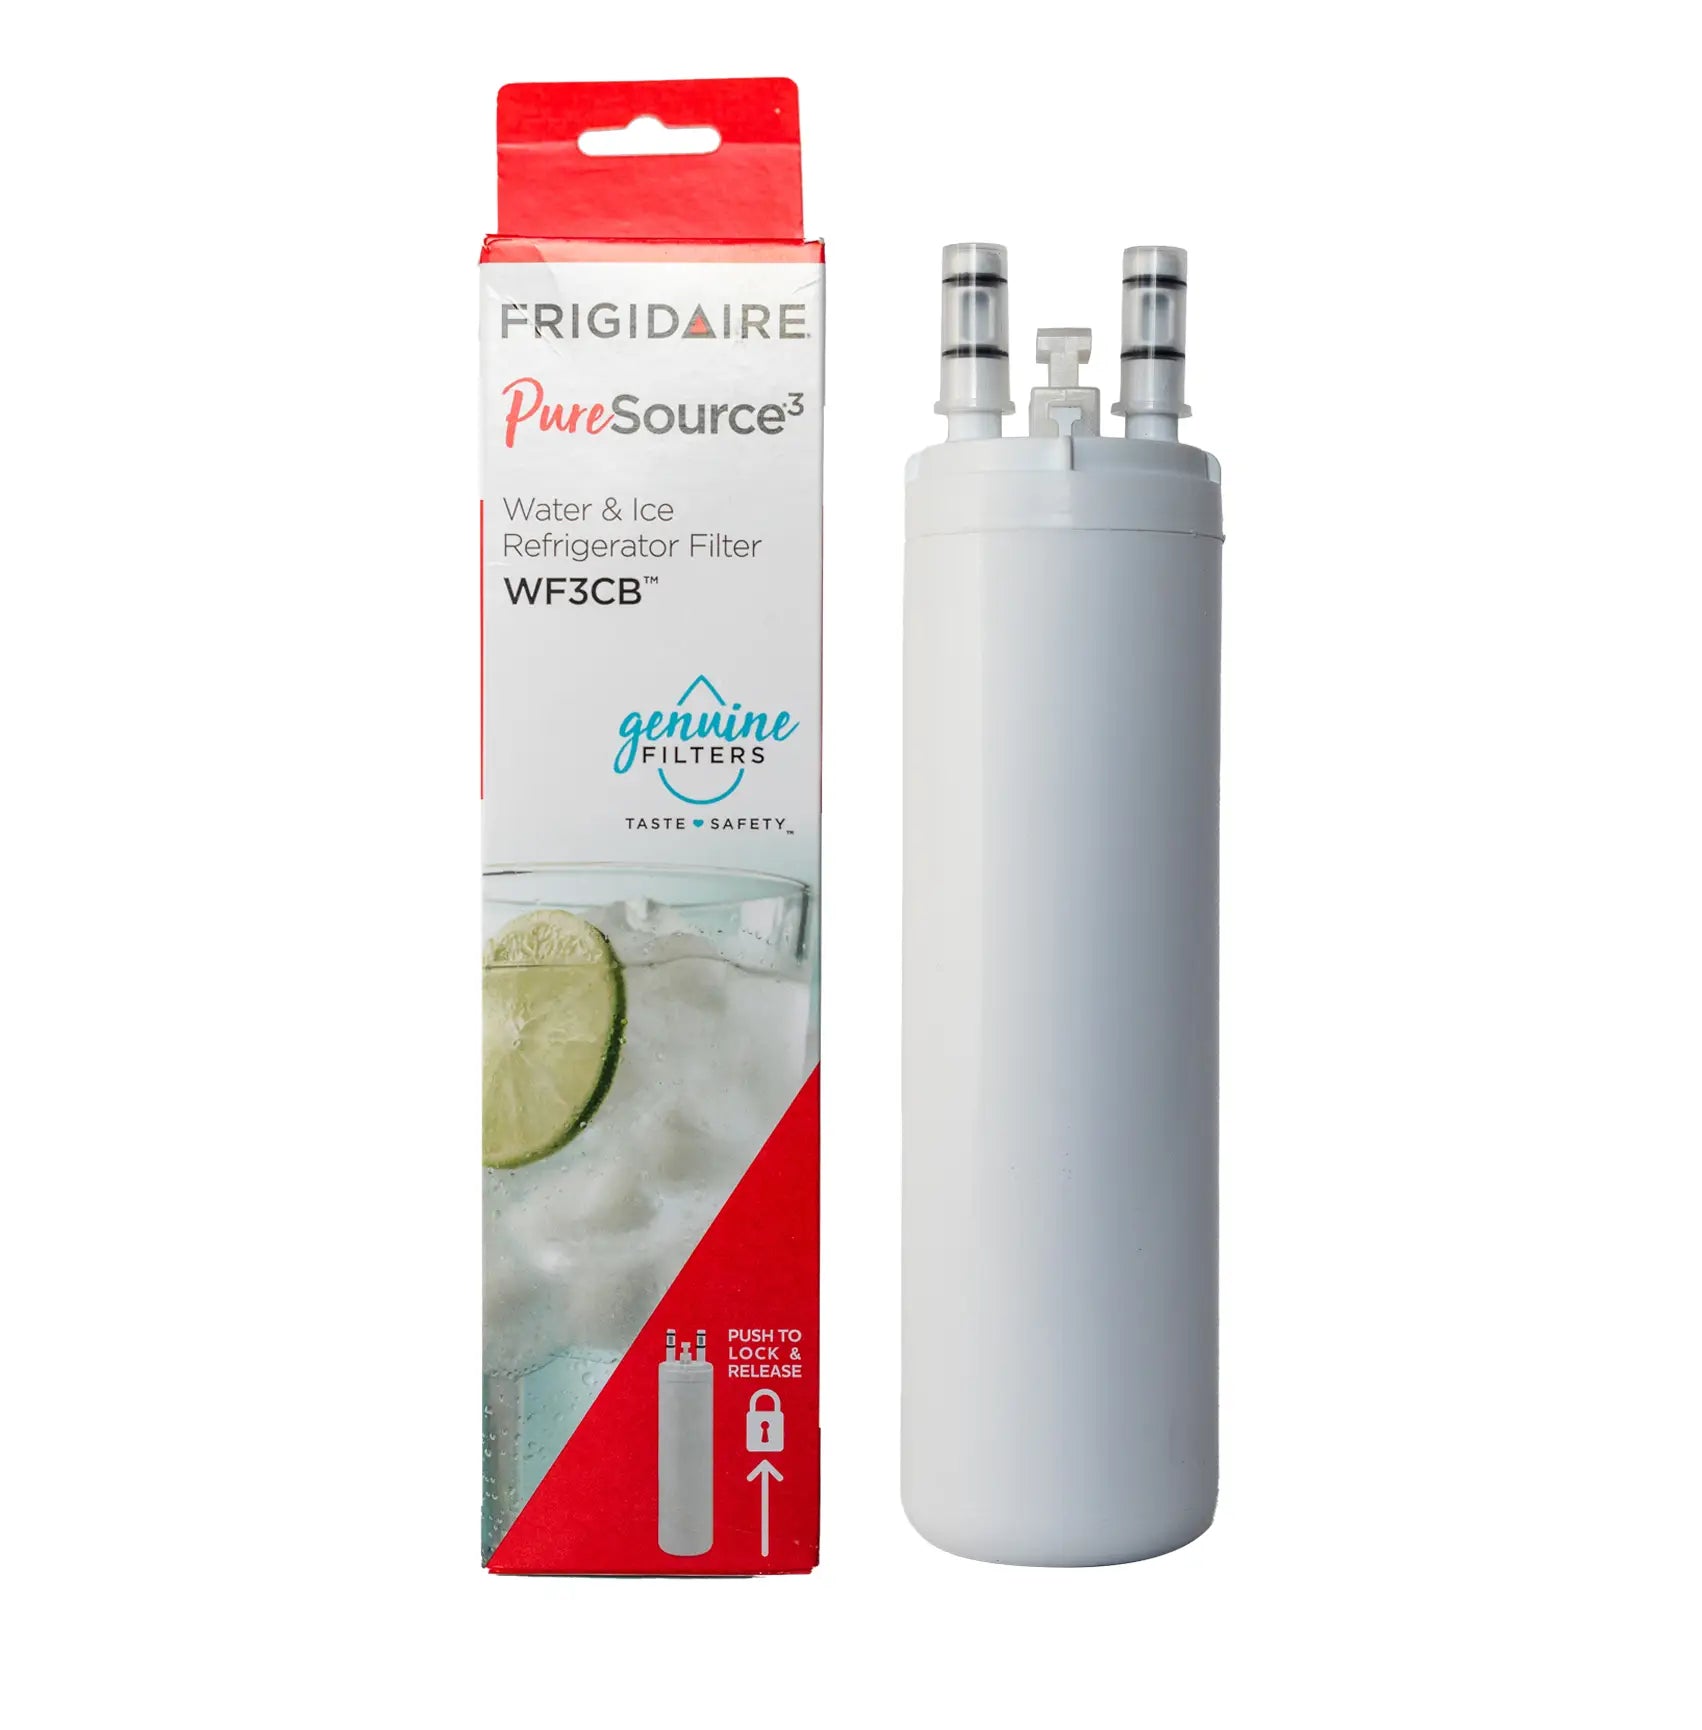 WF3CB by Frigidaire - Frigidaire PureSource® 3 Water and Ice Refrigerator  Filter